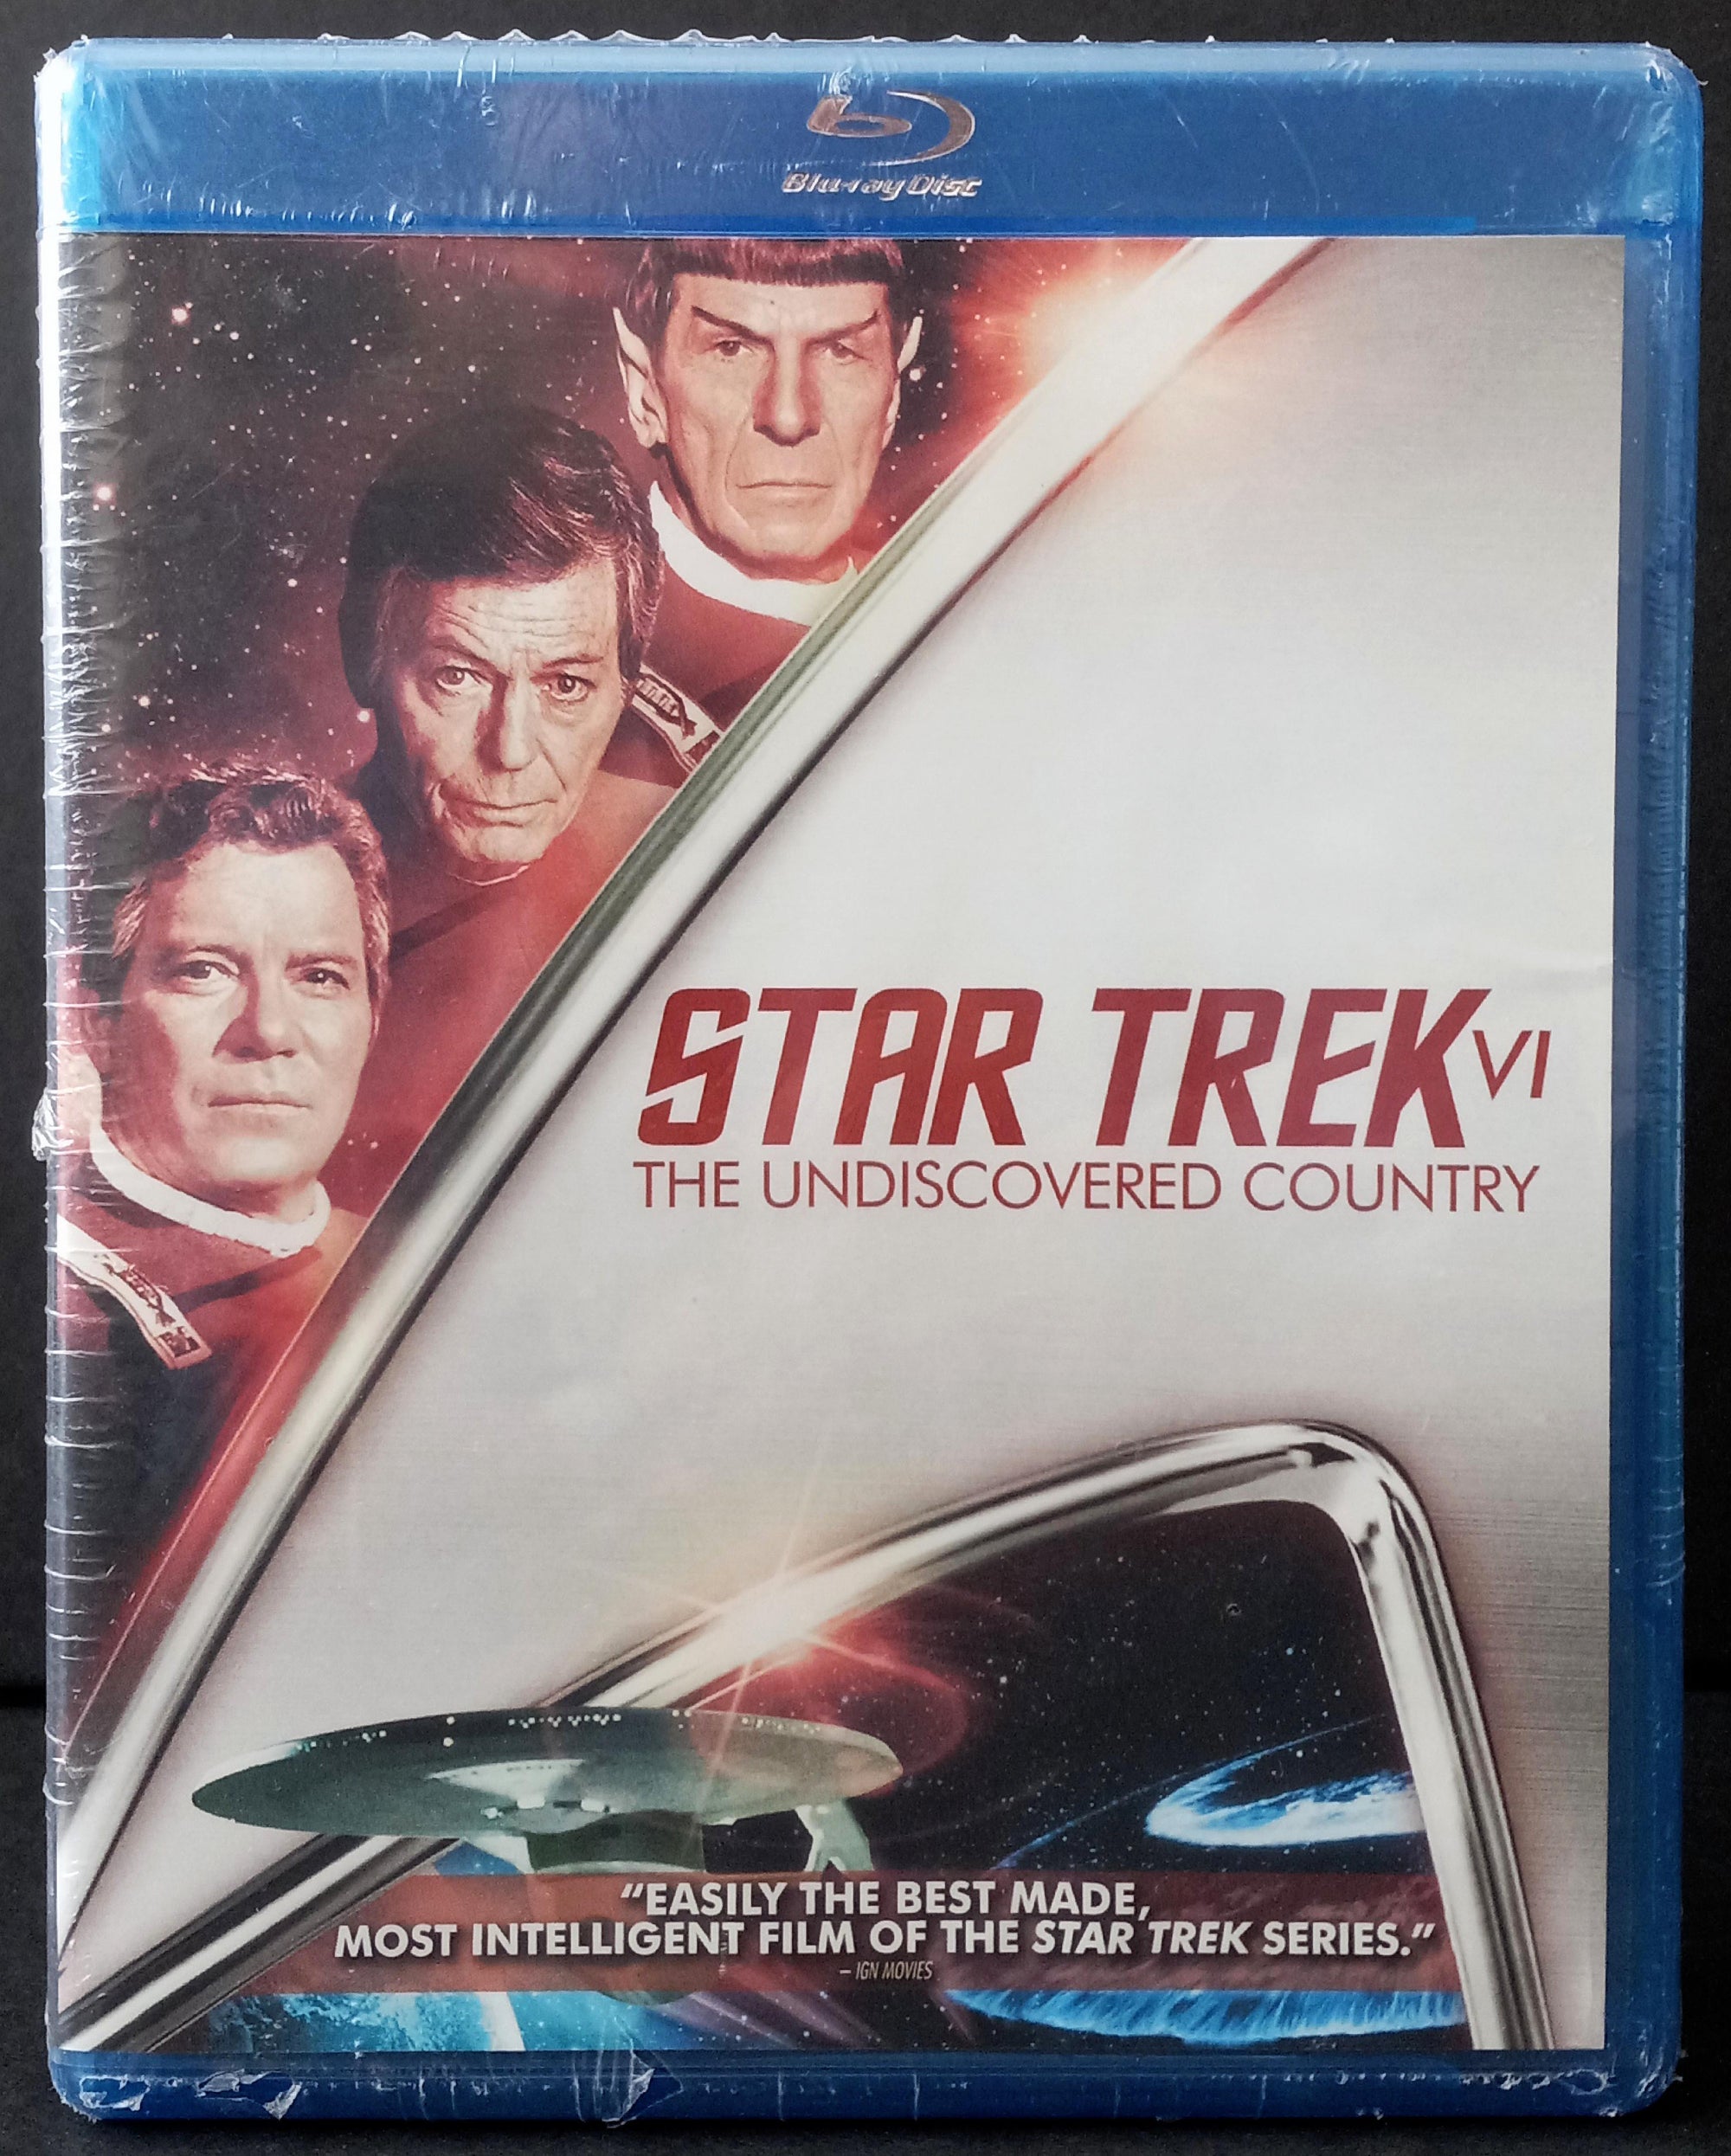 STAR TREK VI: THE UNDISCOVERED COUNTRY - Blu-Ray (sealed), 2009